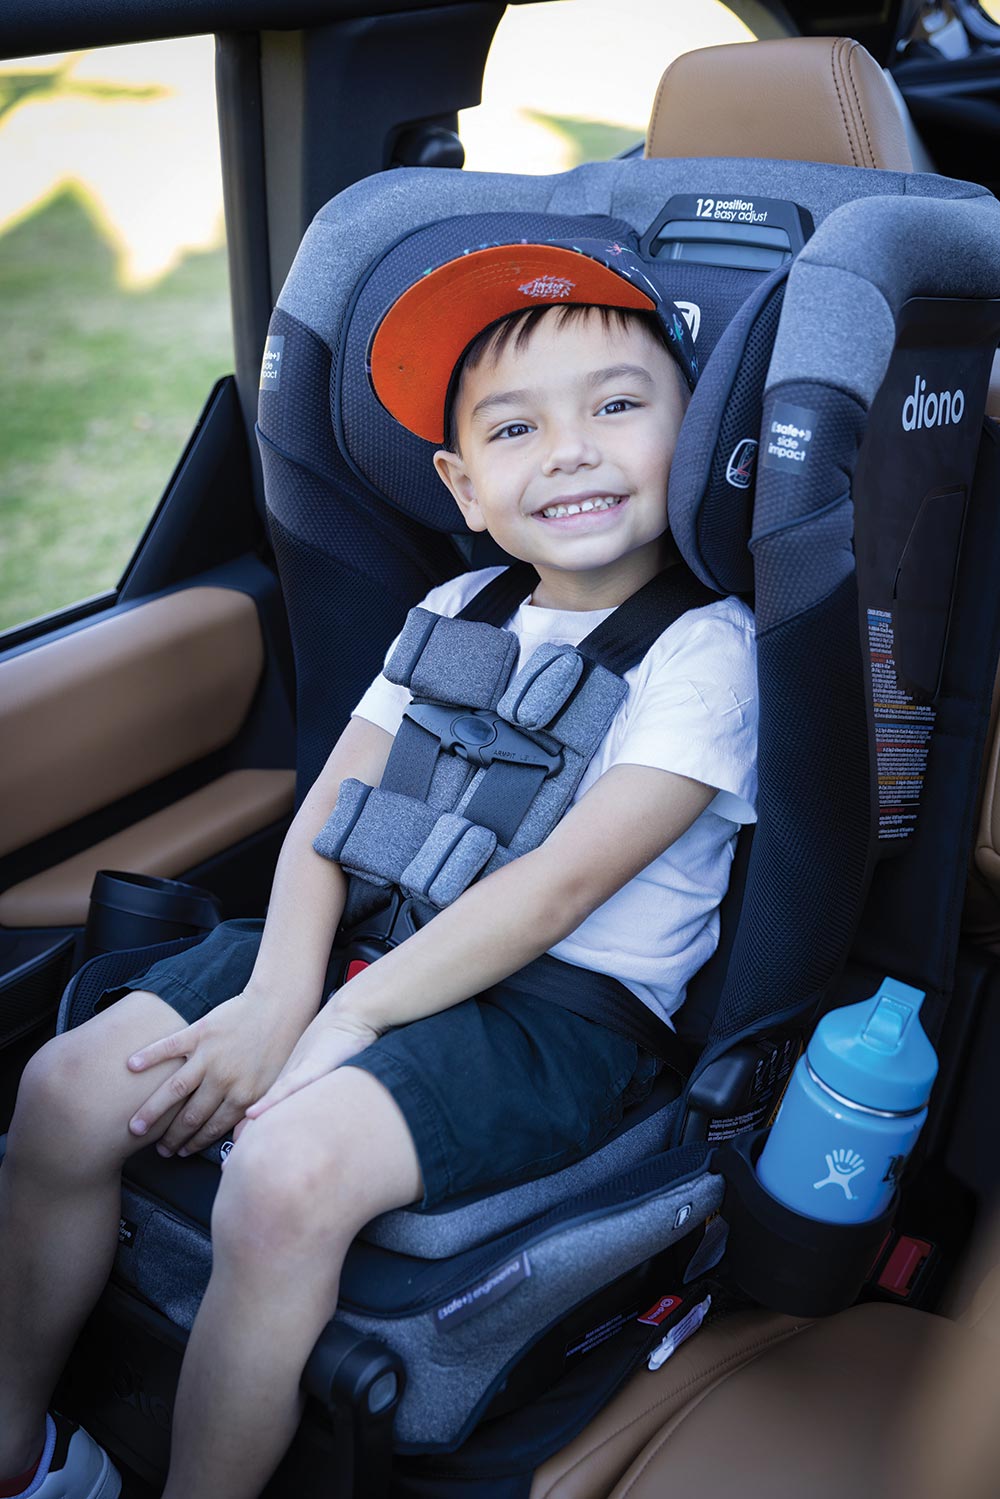 A little boy smiles at the camera in a carseat family gear